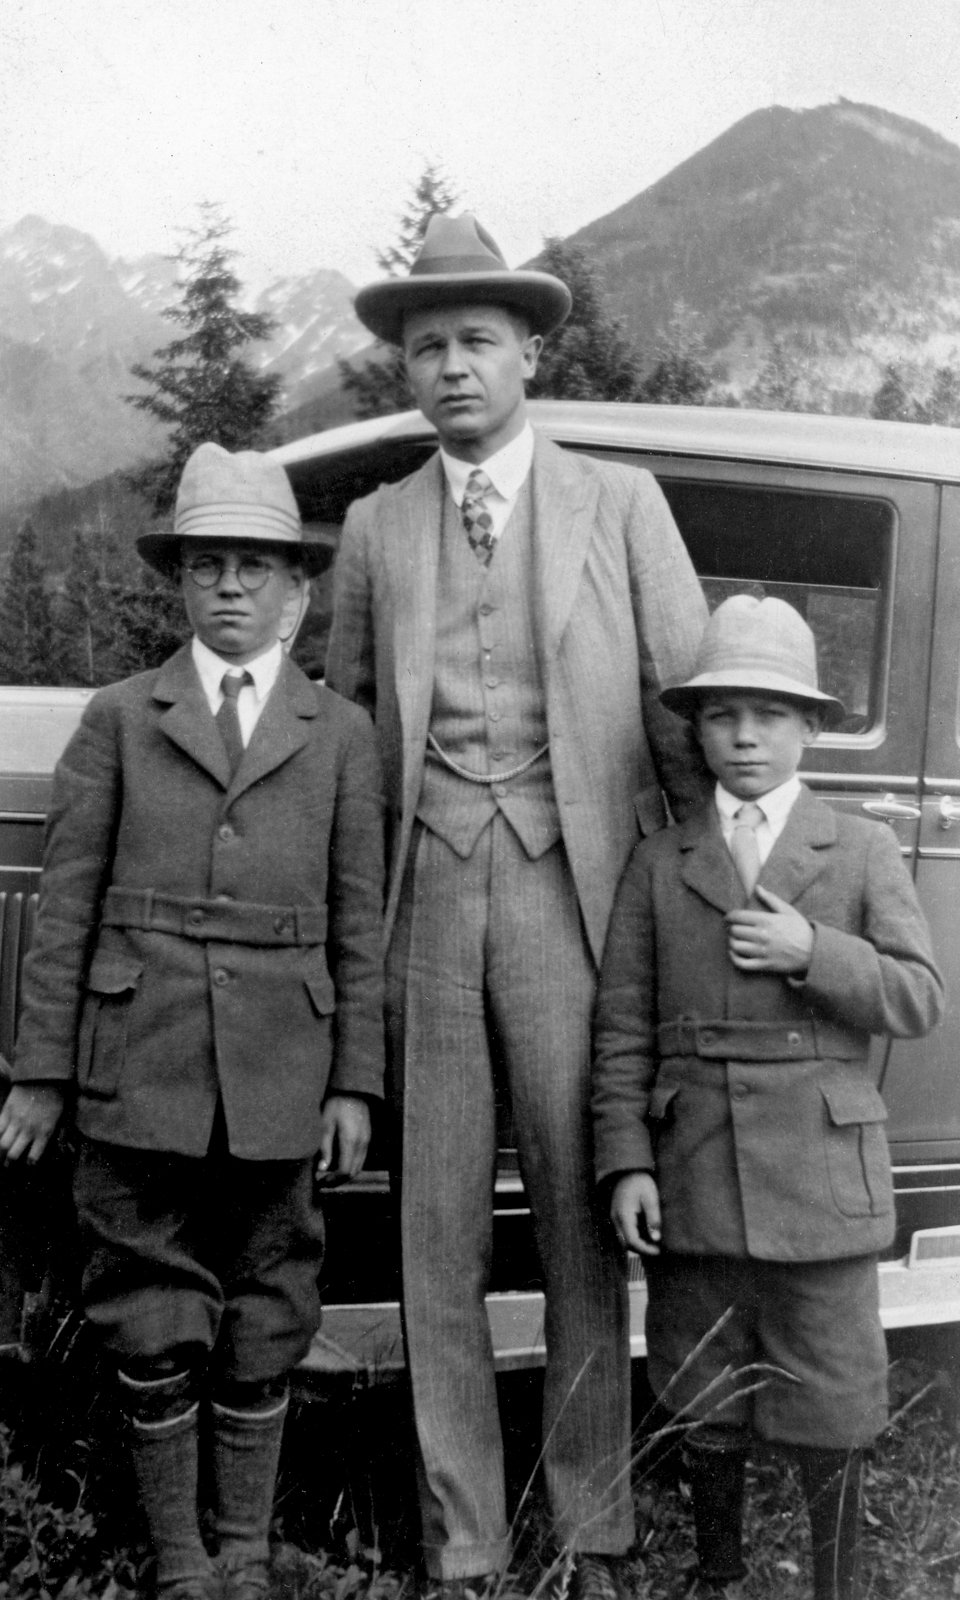 Dad with his father and younger brother Jack, in the Canadian Rockies